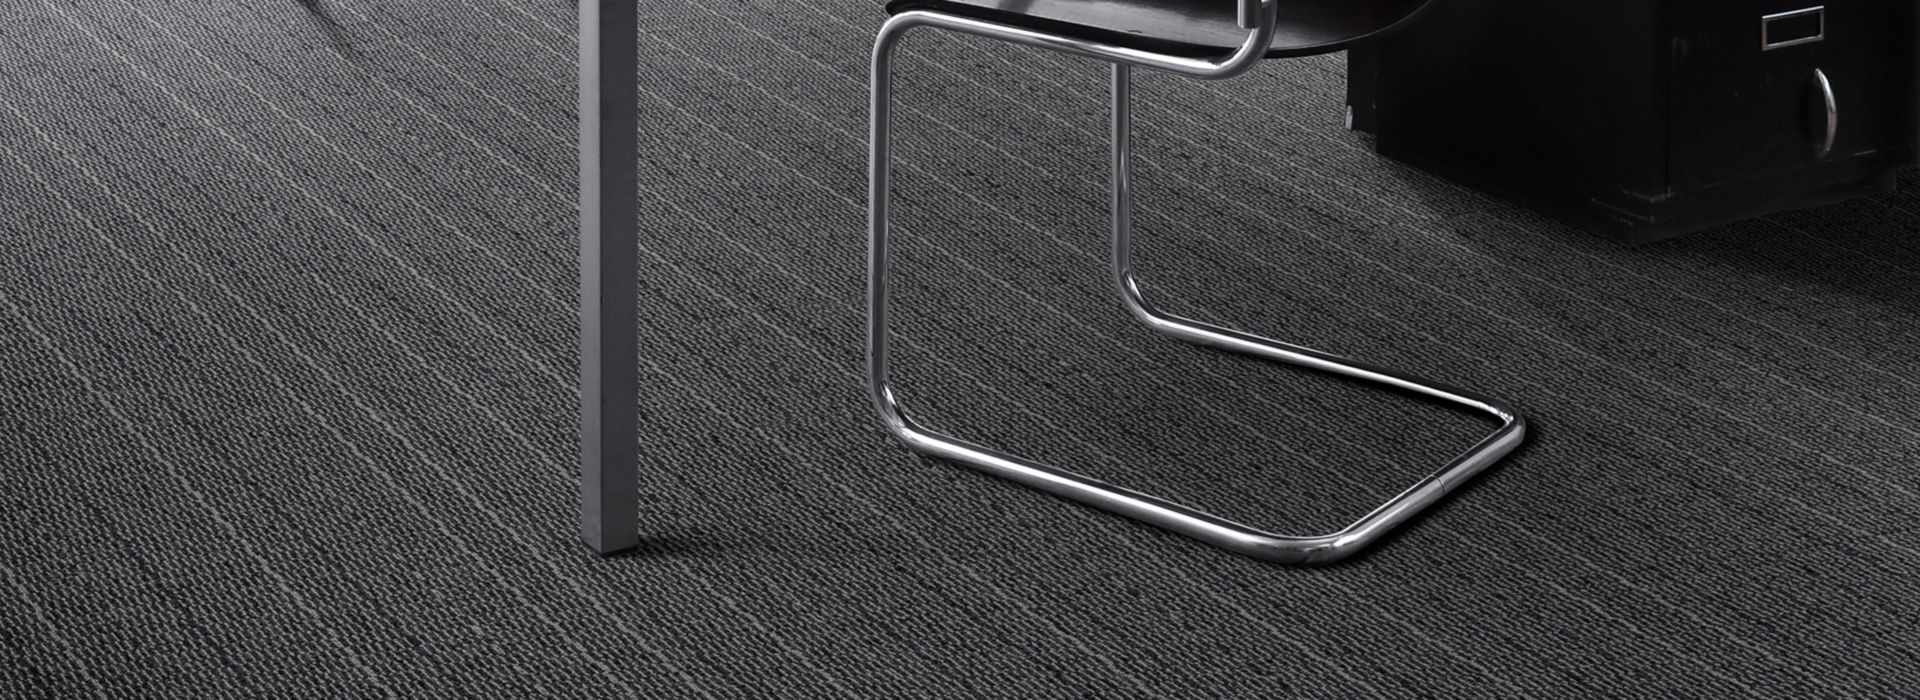 Interface Tangled & Taut carpet tile in private office imagen número 1